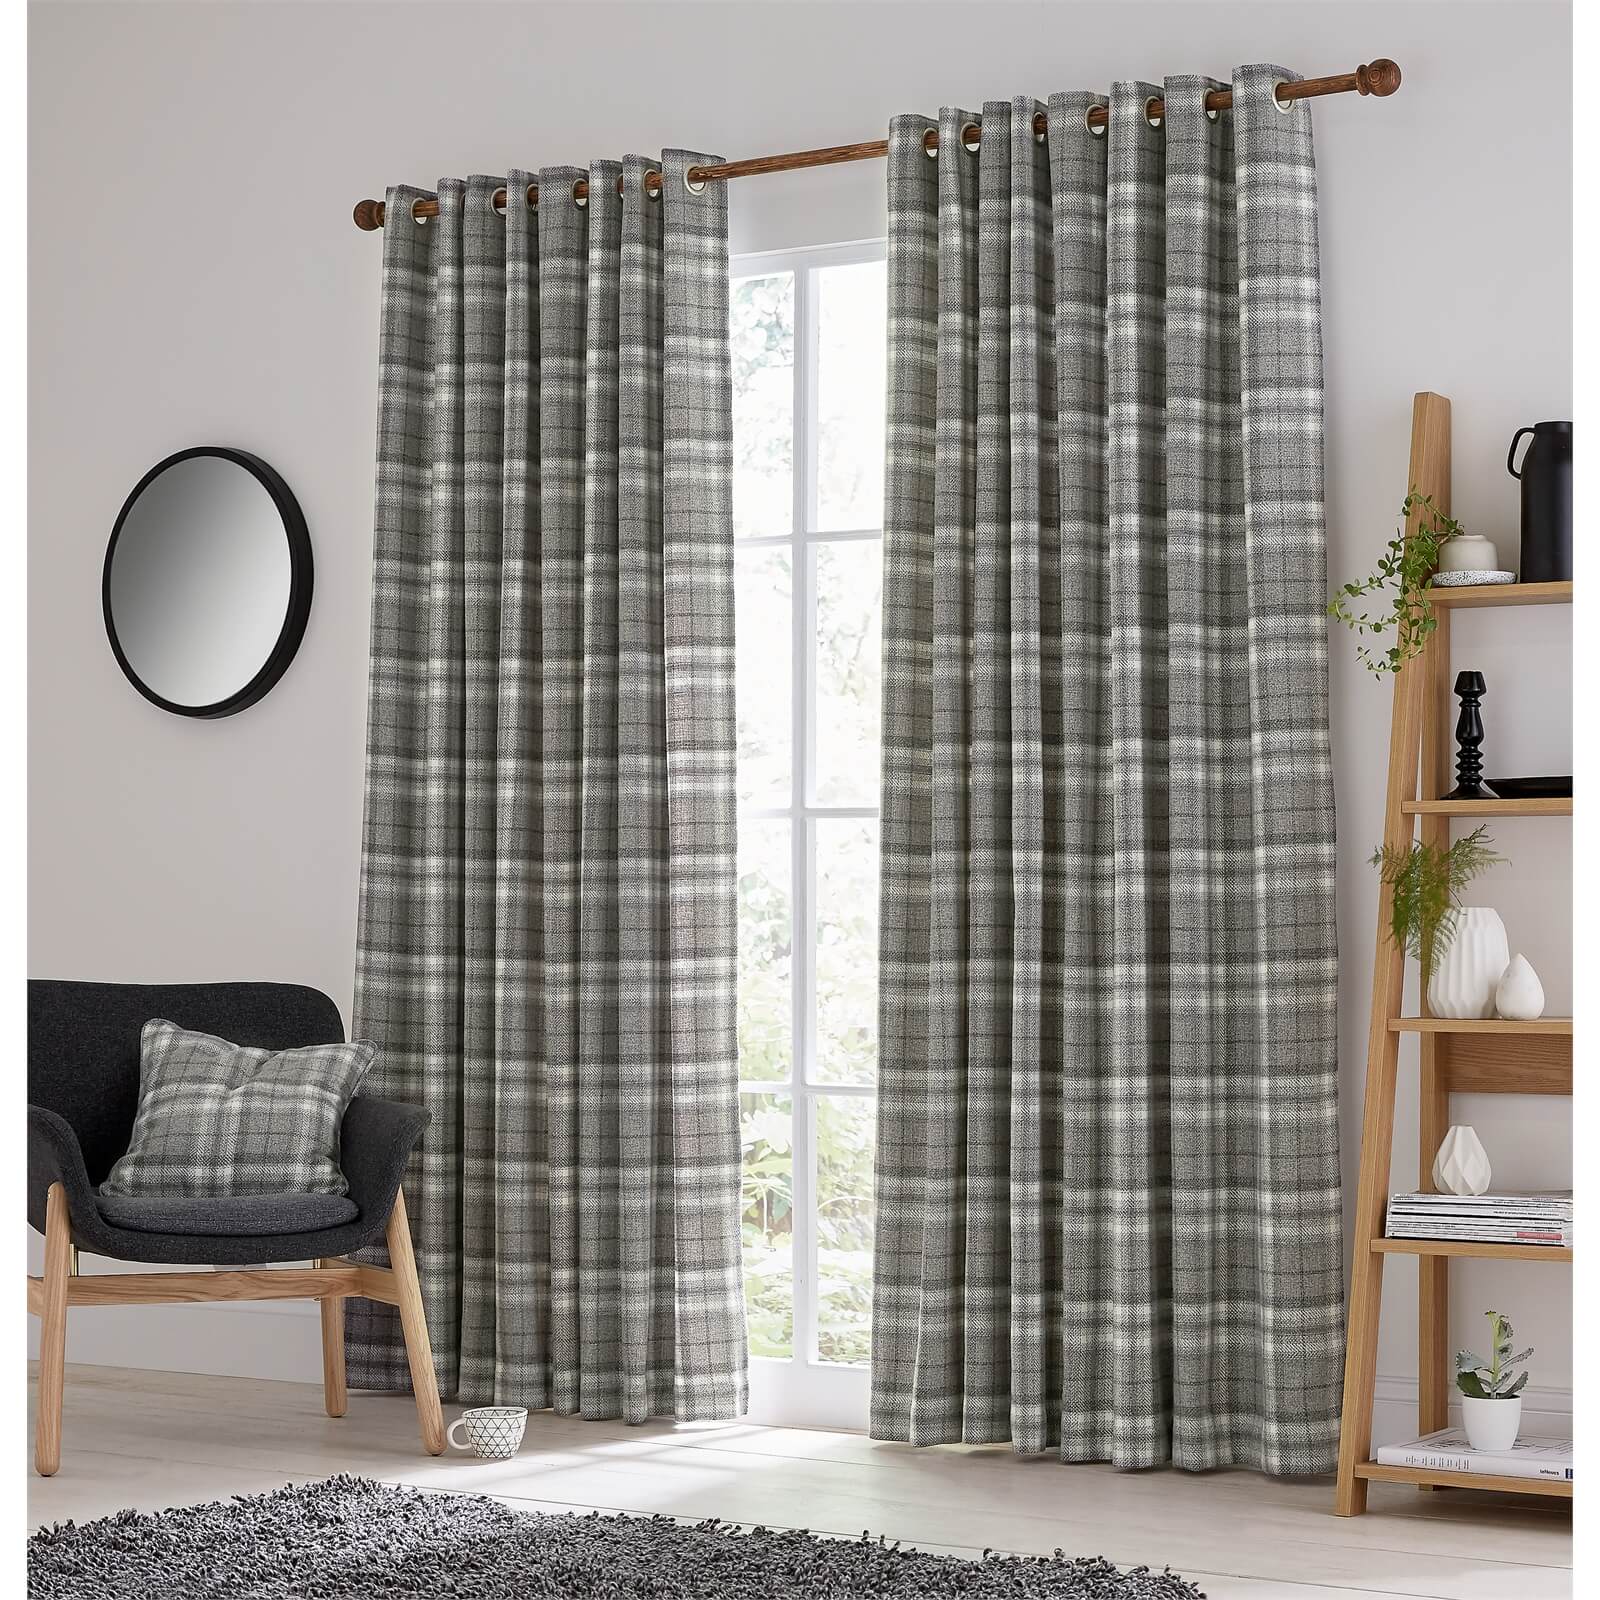 Helena Springfield Harriet Lined Curtains 66 x 90 - Charcoal